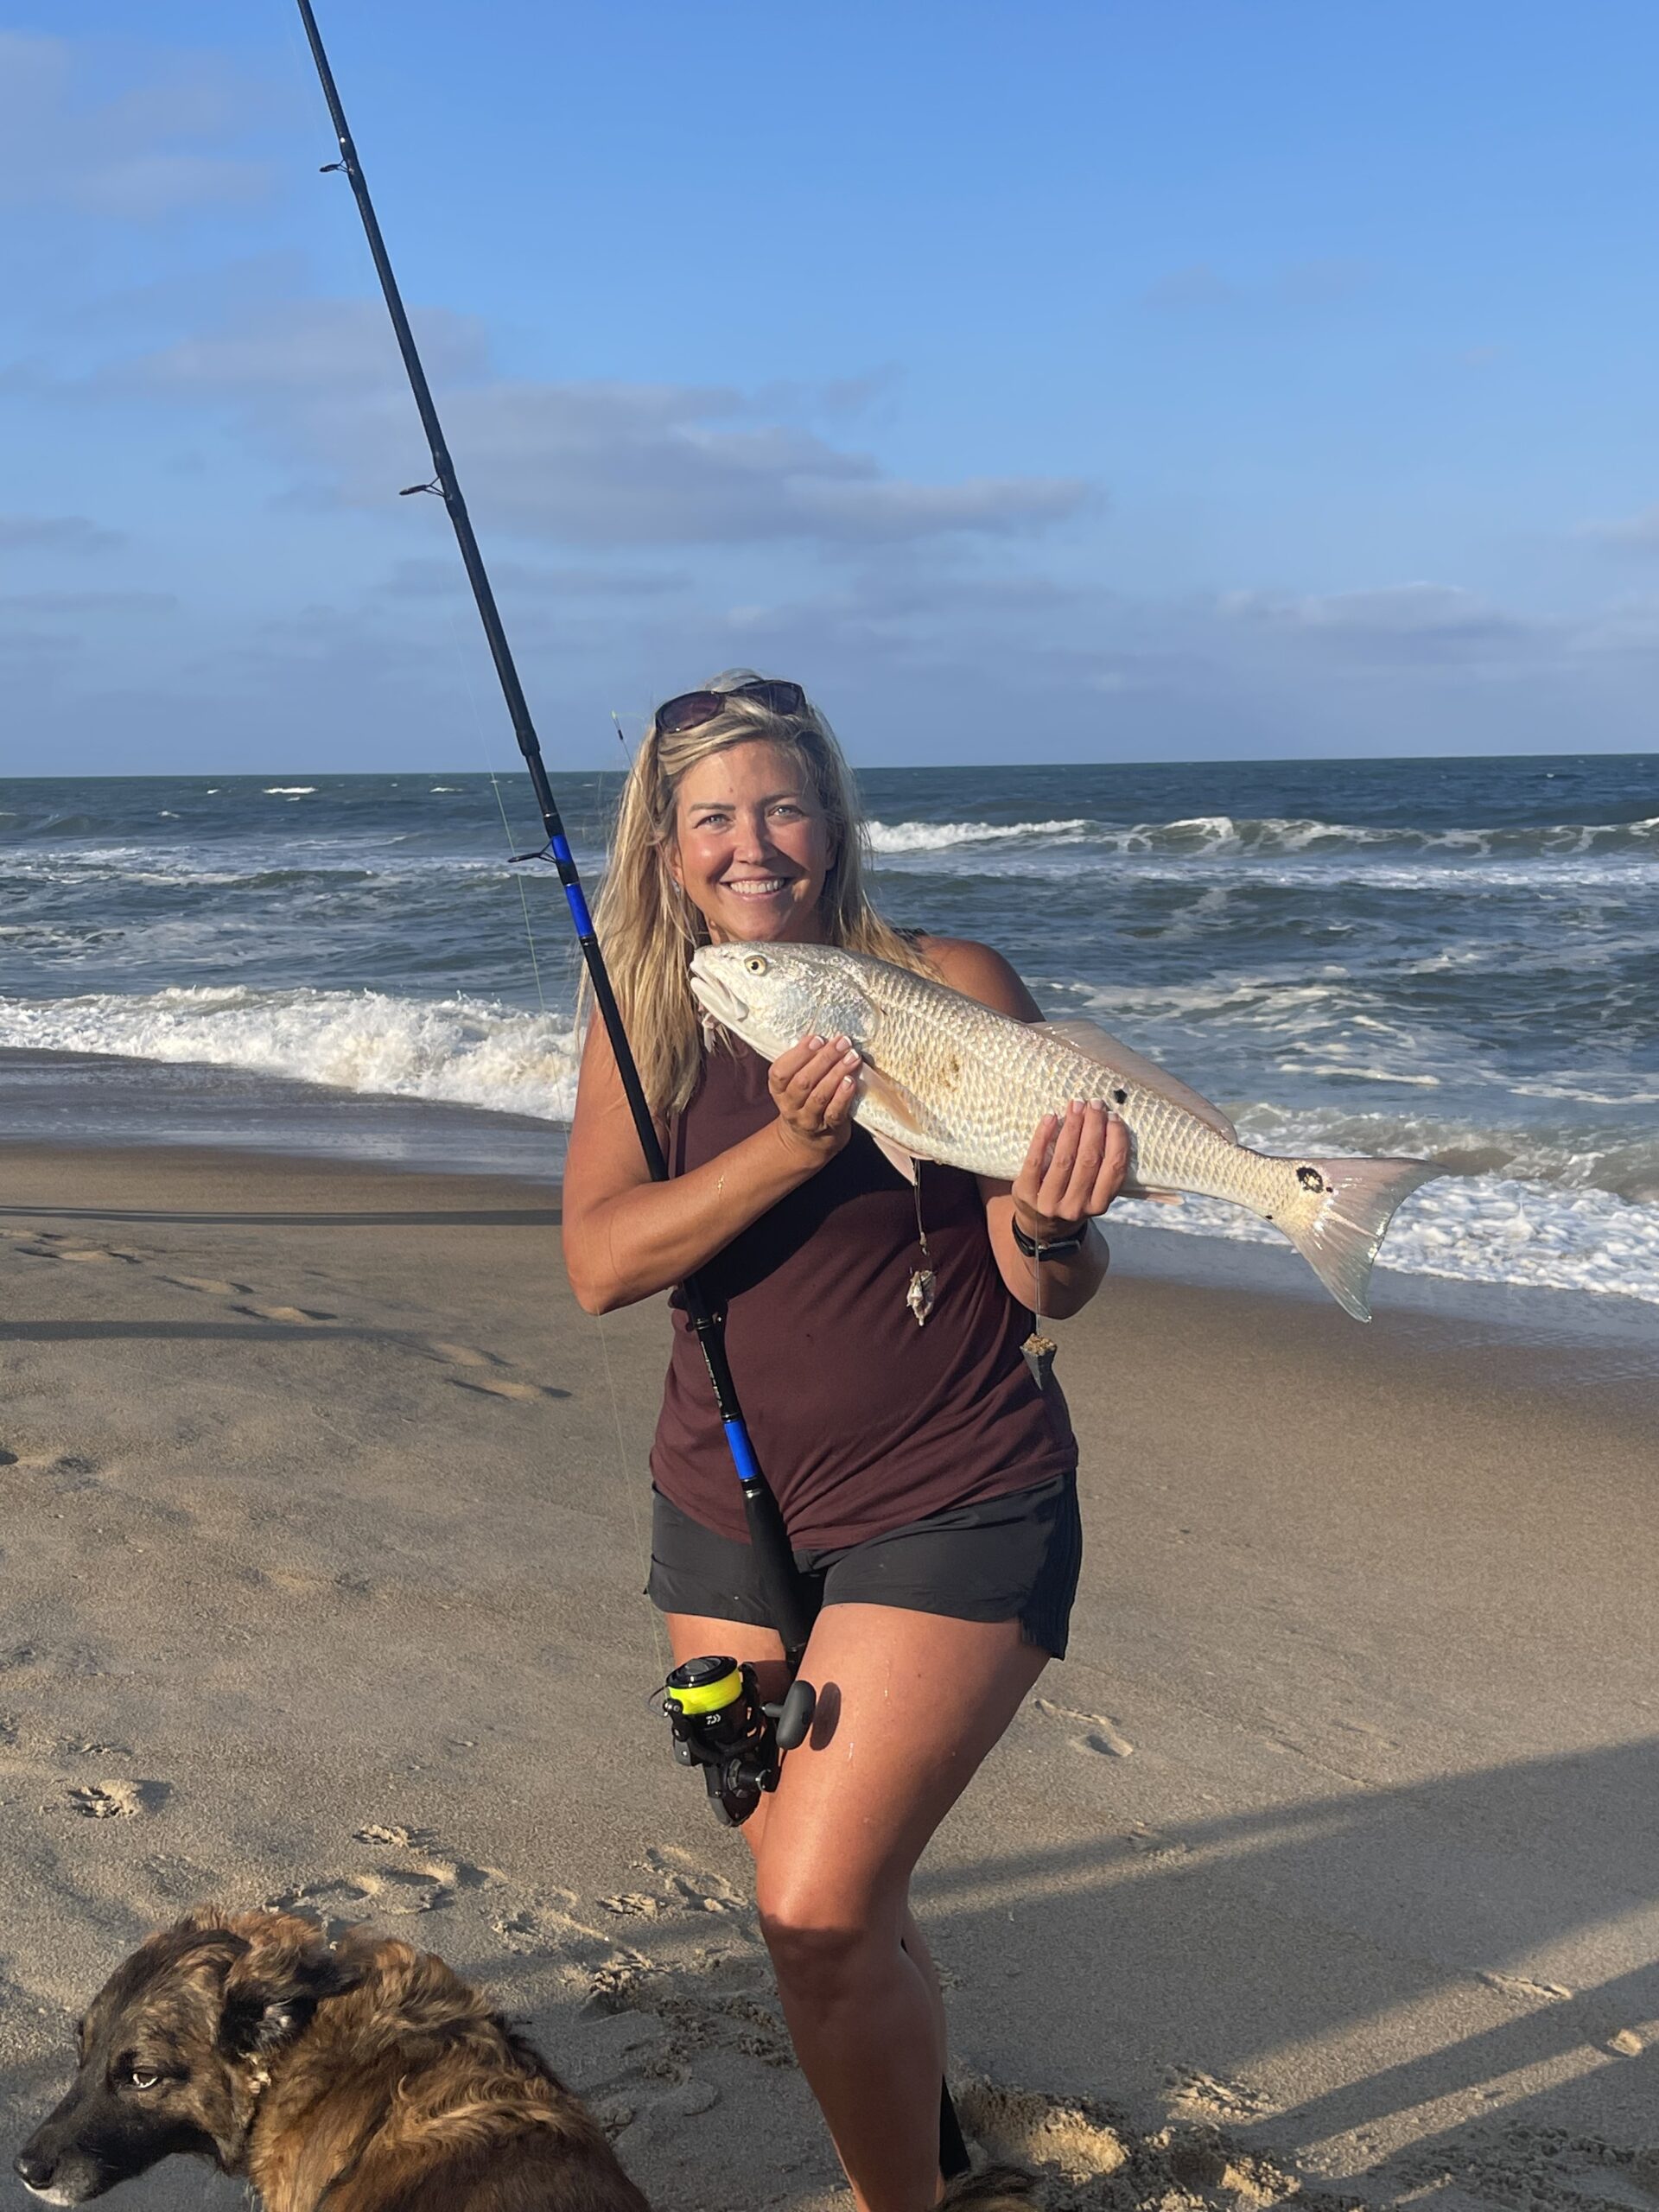 Outer Banks Red Drum fishing.